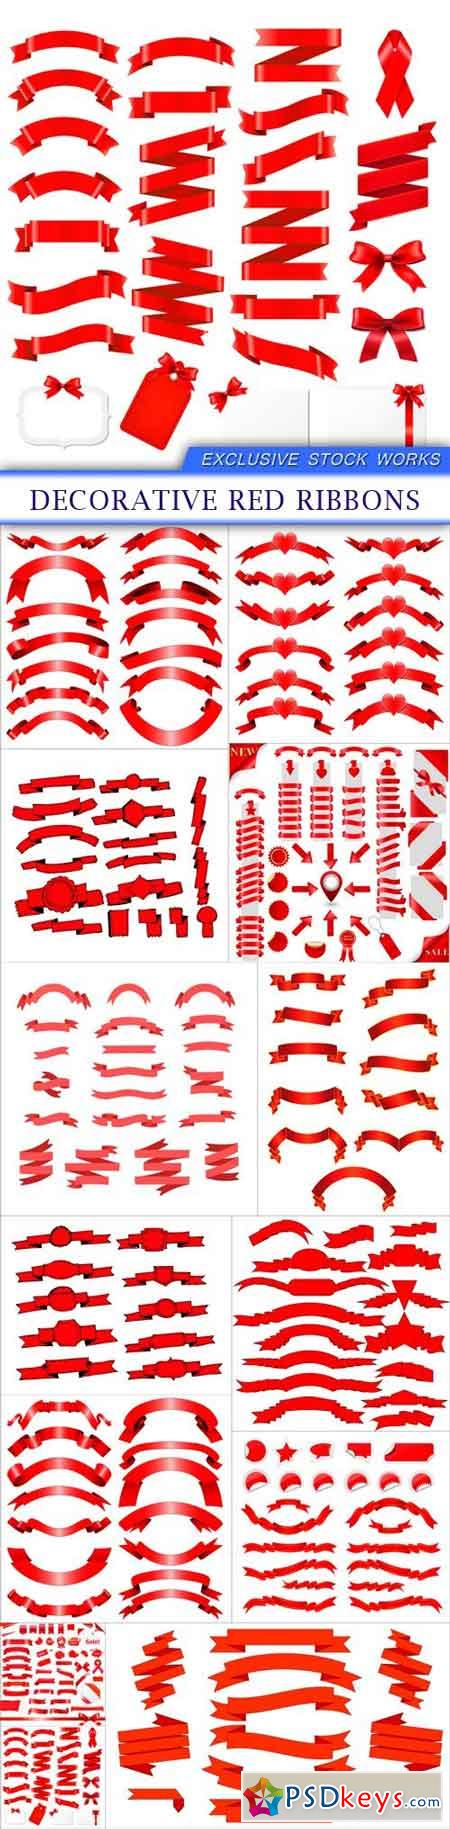 Decorative red ribbons 13x EPS